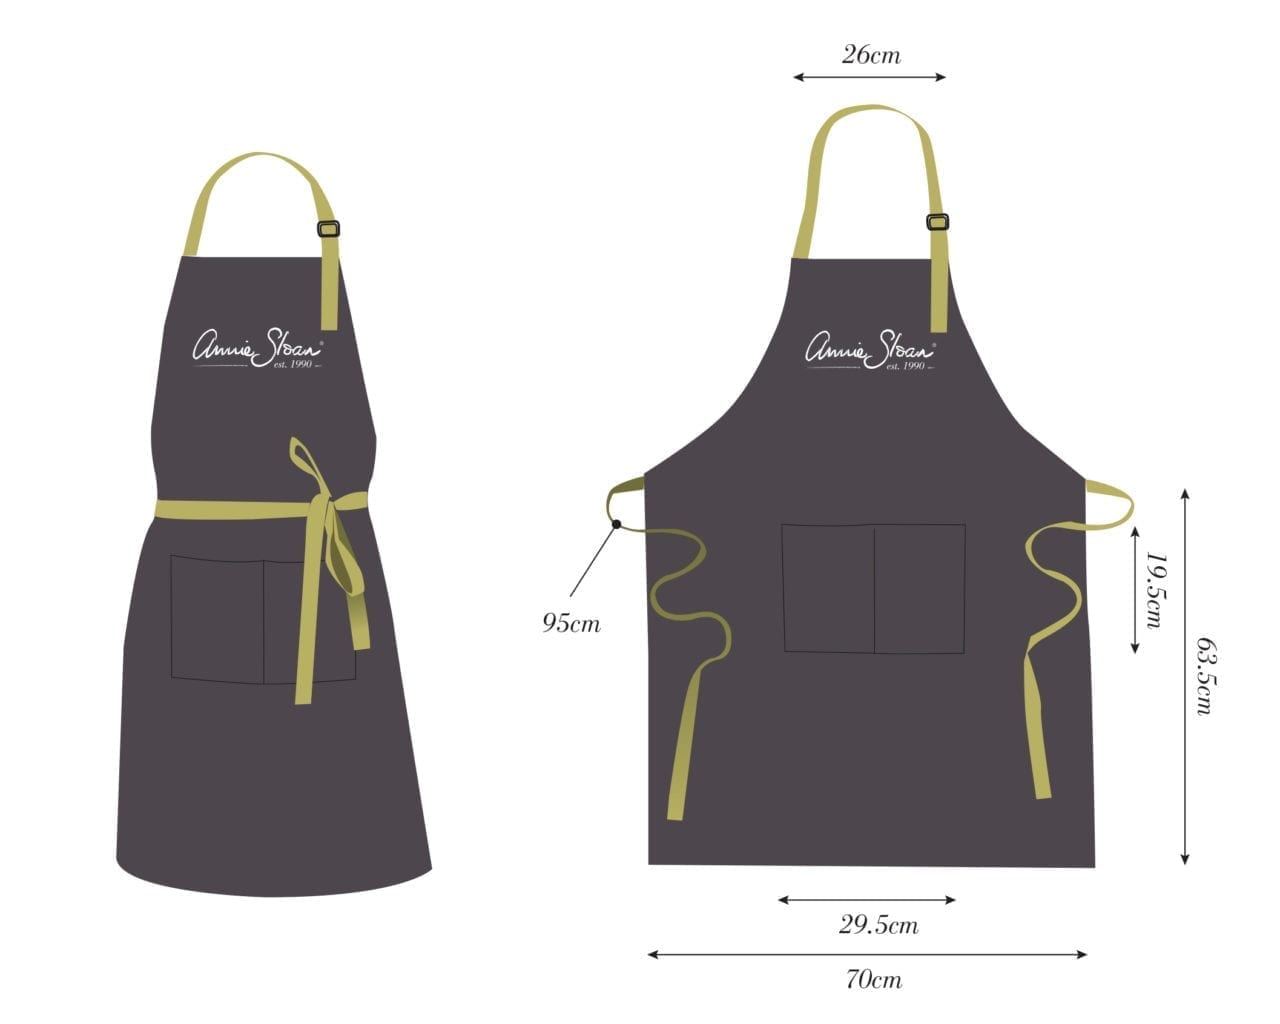 The Annie Sloan Apron illustration and measurements